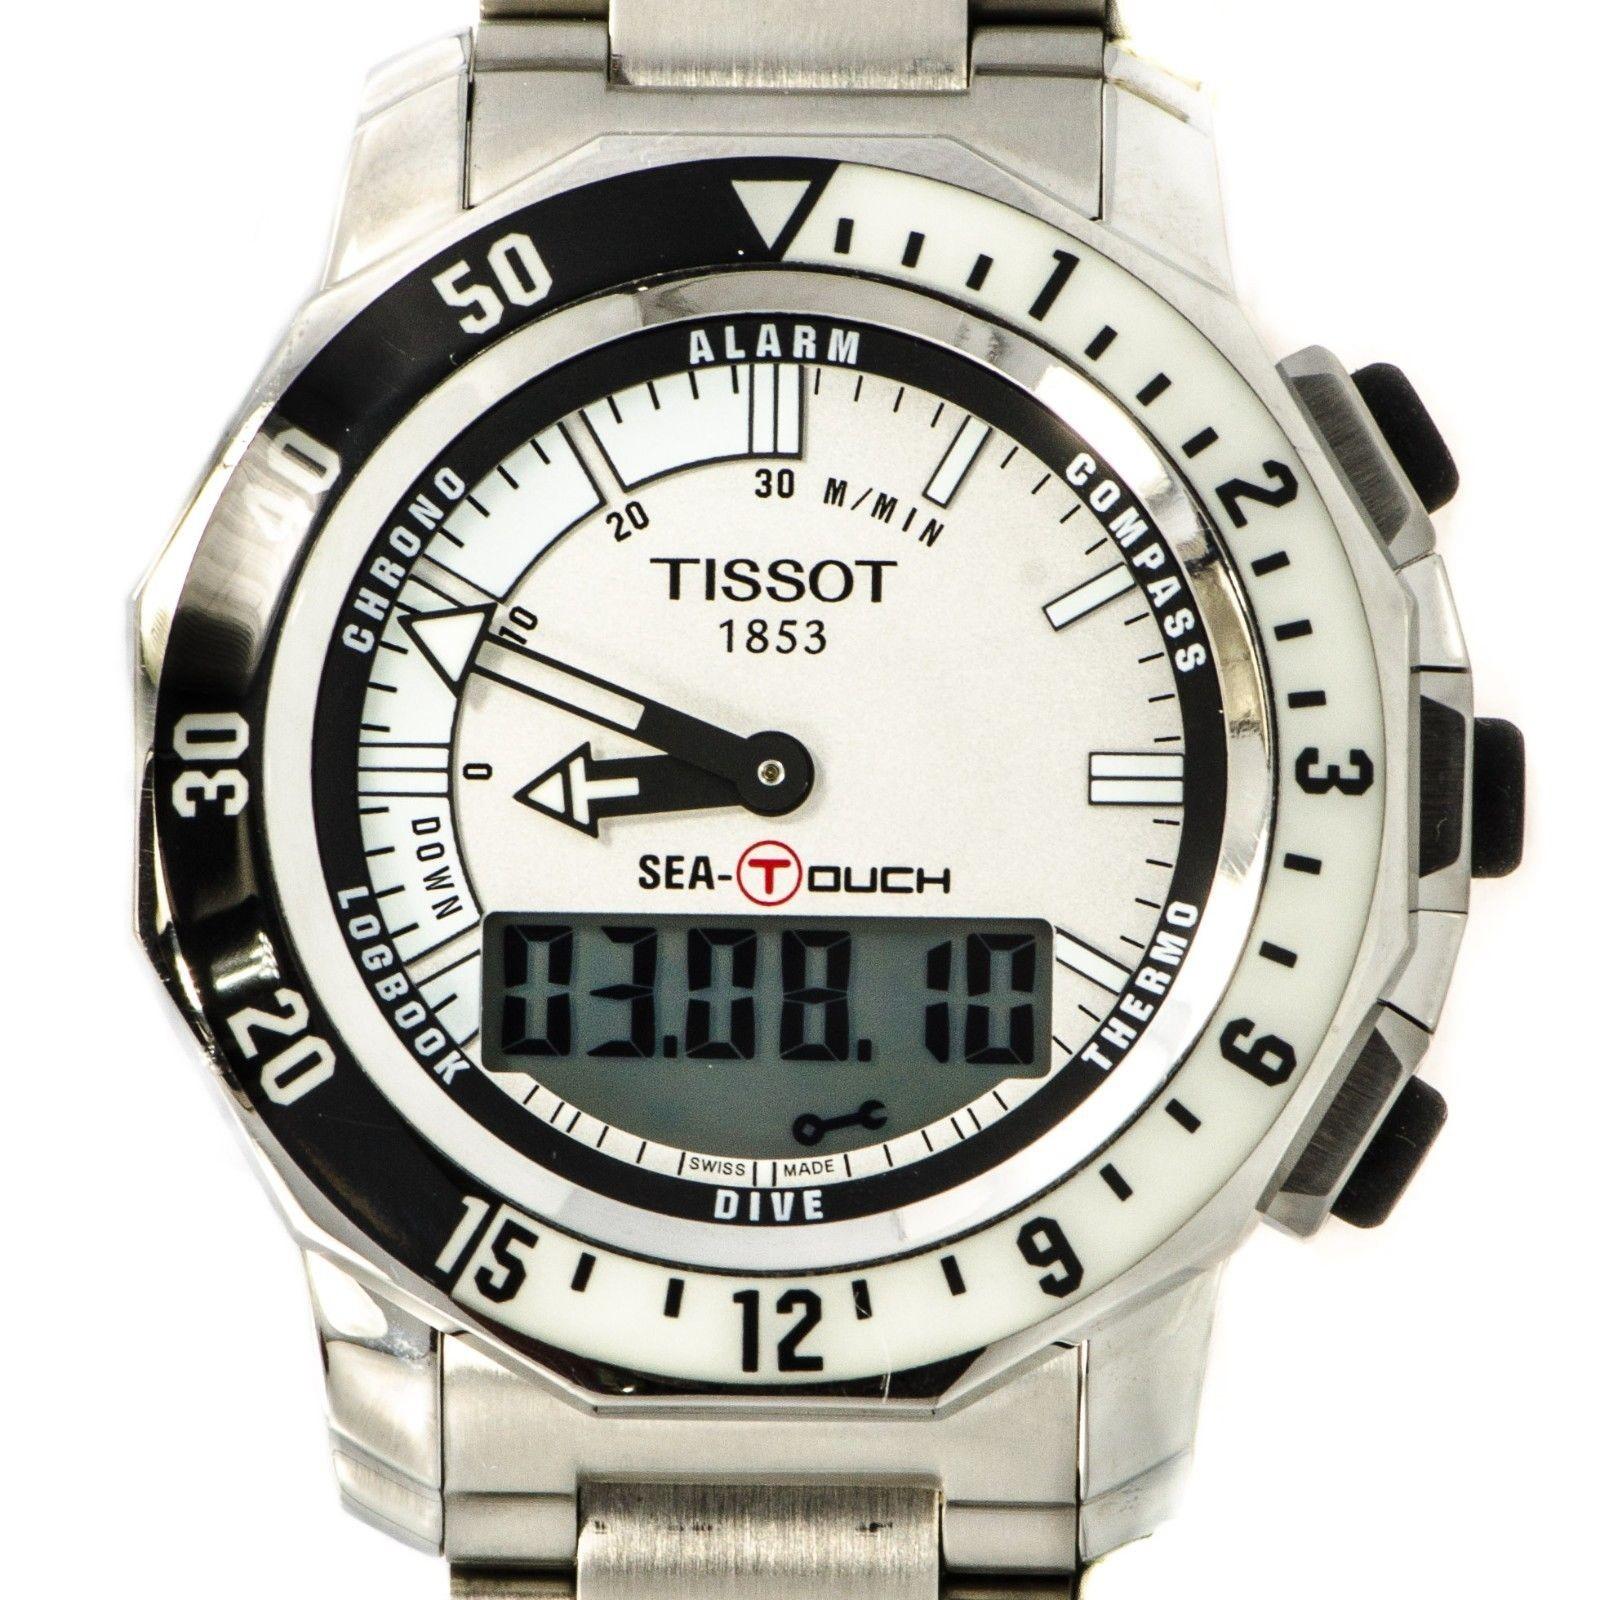 Tissot T026420A Stainless Steel White Dial Alarm Compass Digital Men's Watch In Excellent Condition For Sale In Miami, FL